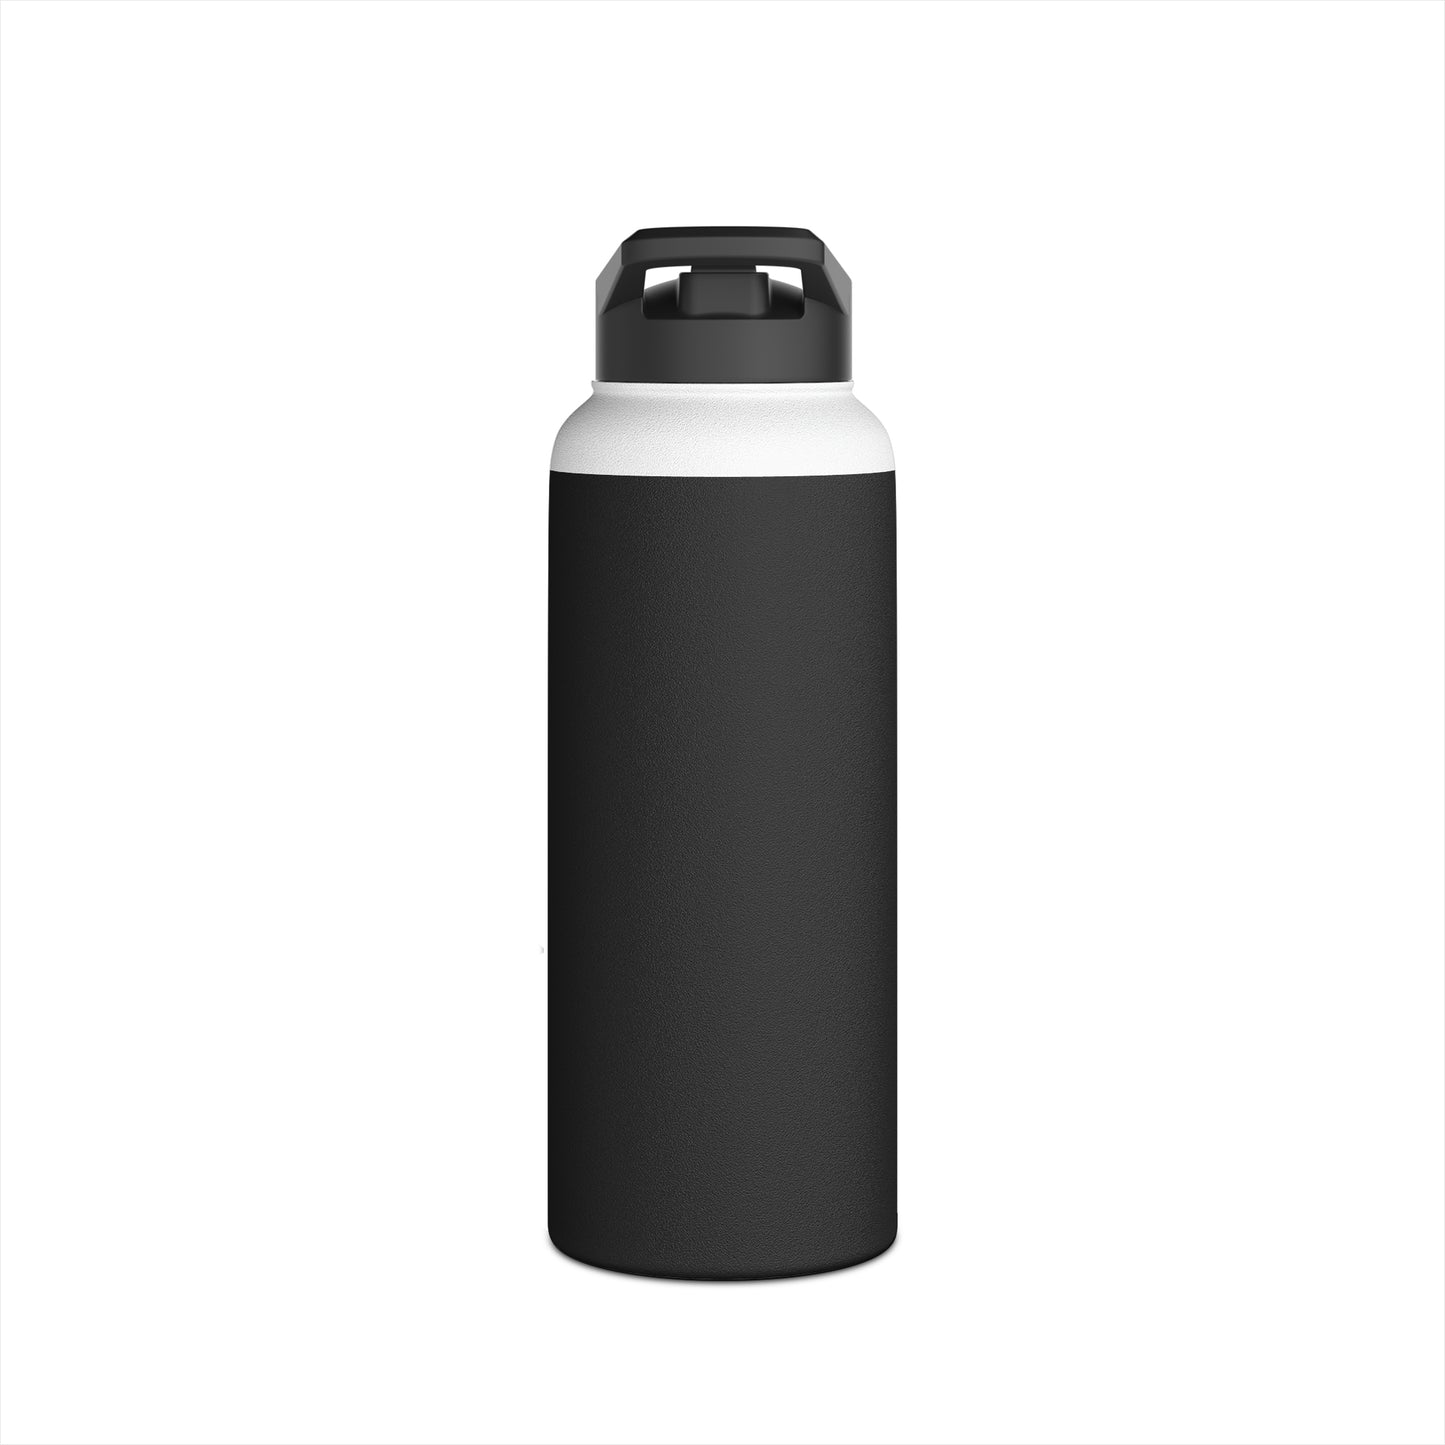 Stainless Steel Water Bottle - When Life Gets Complicated I Go Fishin